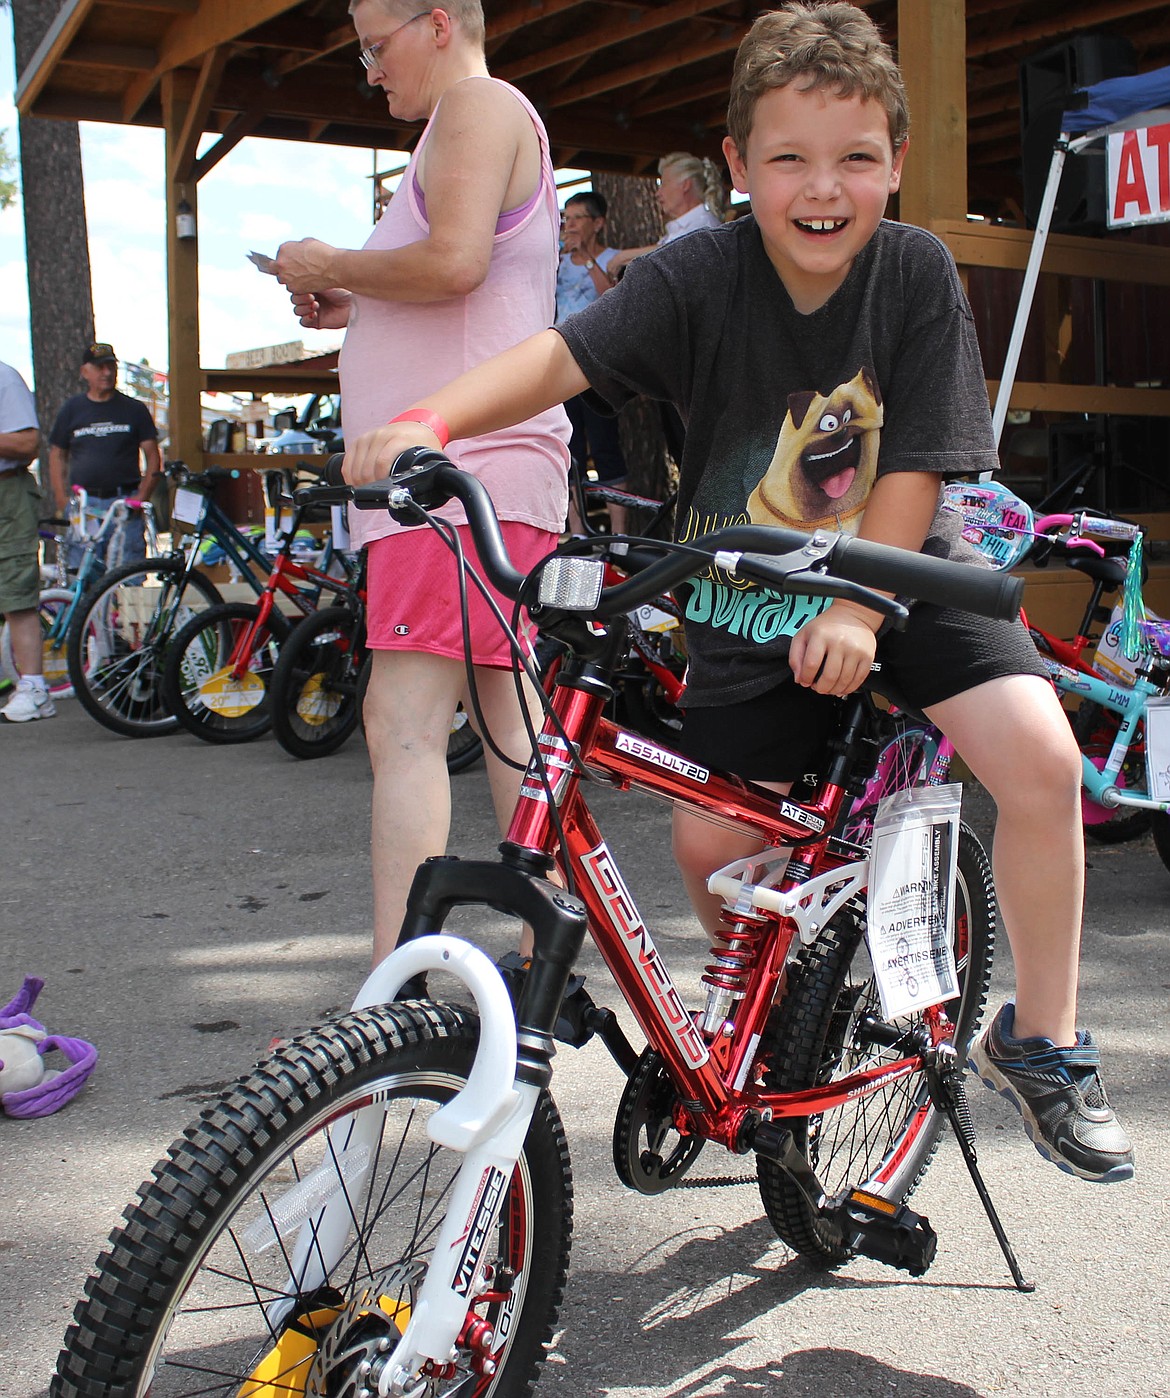 Kameron Meeks, 7, of Superior wins a bike at the bike, fishing pole and tent raffle at the fair on Saturday. (Maggie Dresser/Mineral Independent)